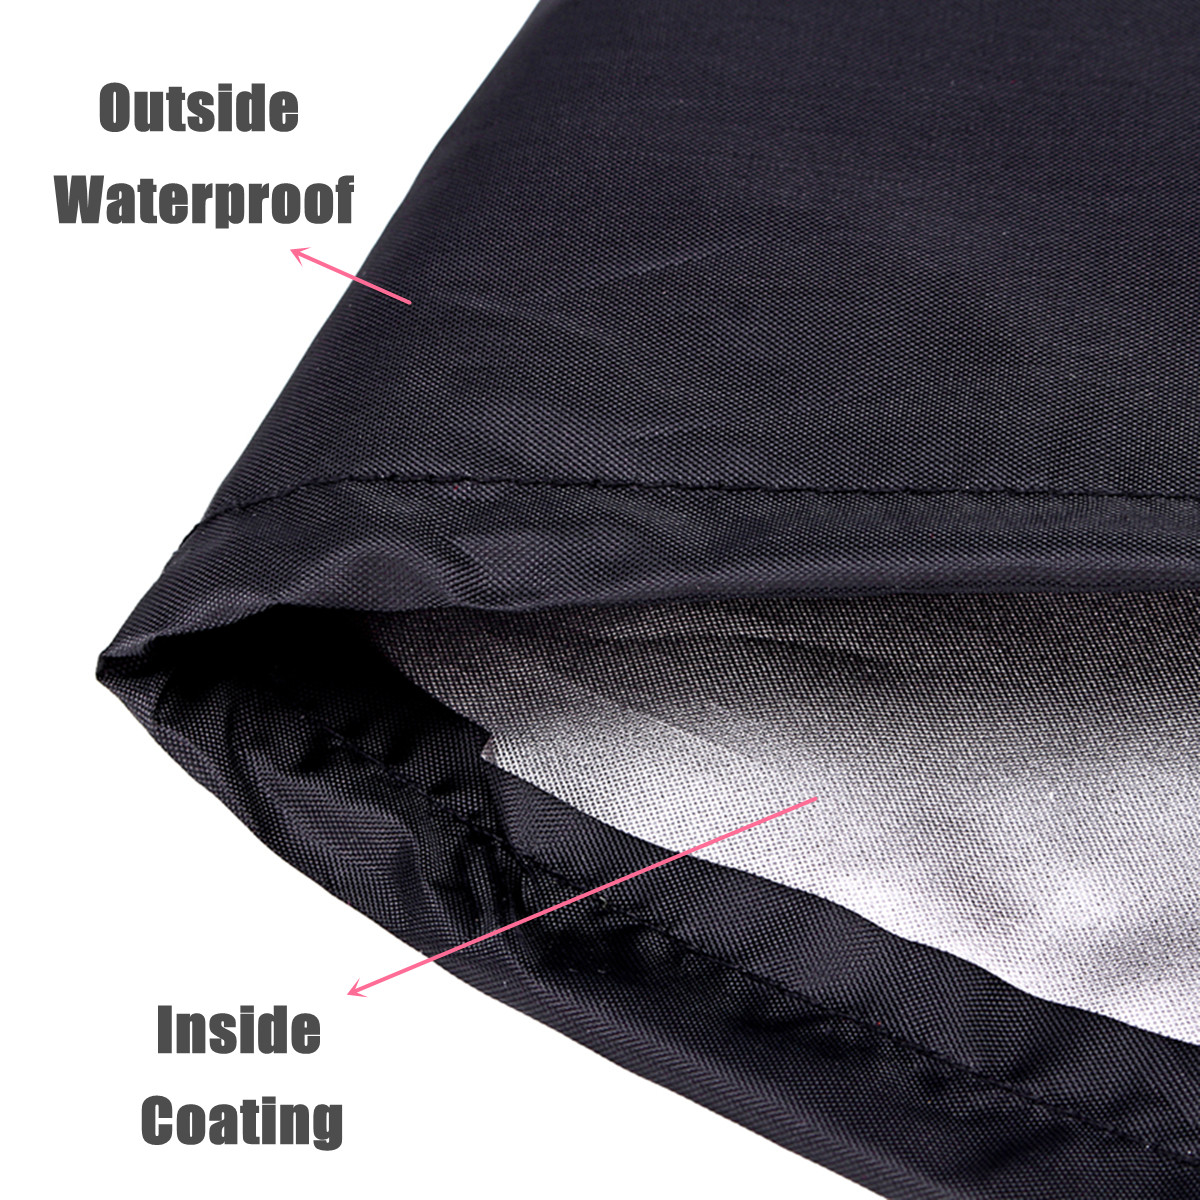 59-Inch-BBQ-Grill-Barbecue-Waterproof-Cover-Heavy-Duty-UV-Protector-Outdoor-Yard-Camping-1352191-4